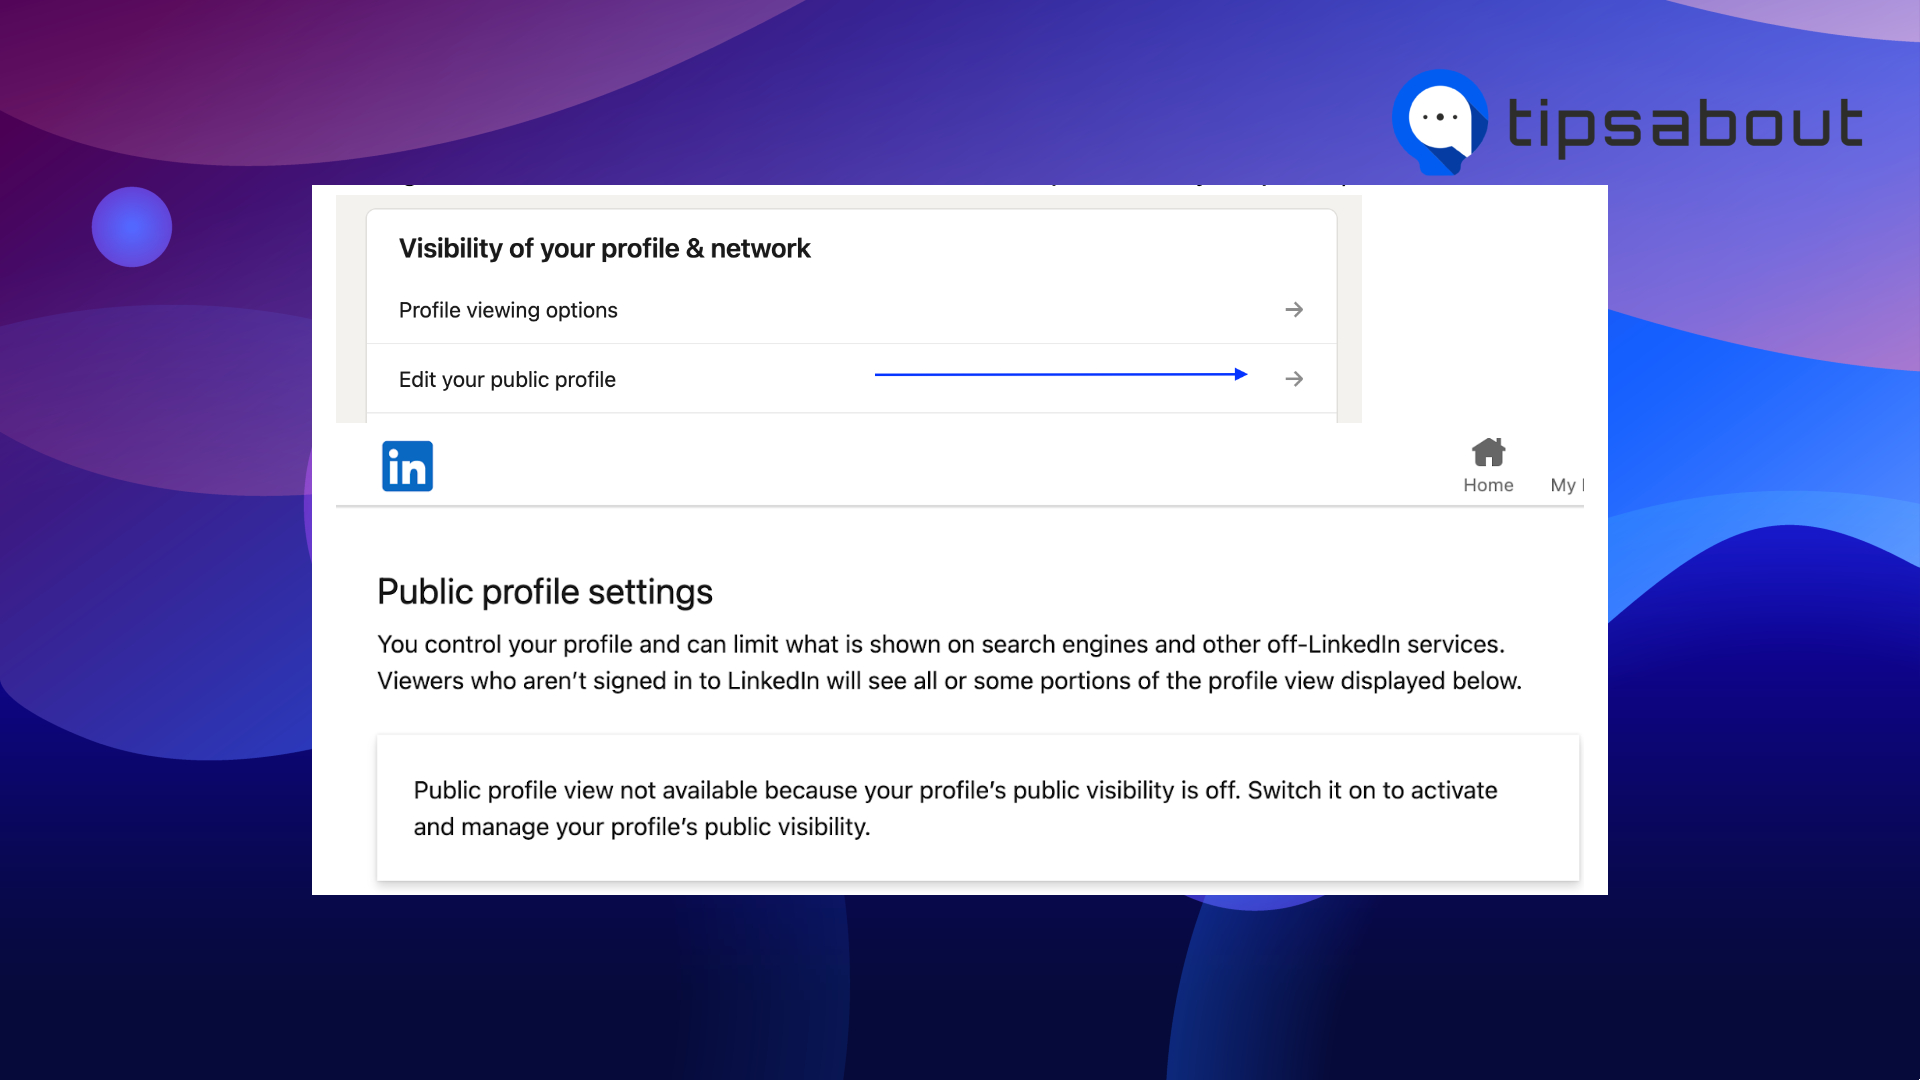 Edit your public profile option on LinkedIn and preview of your profile